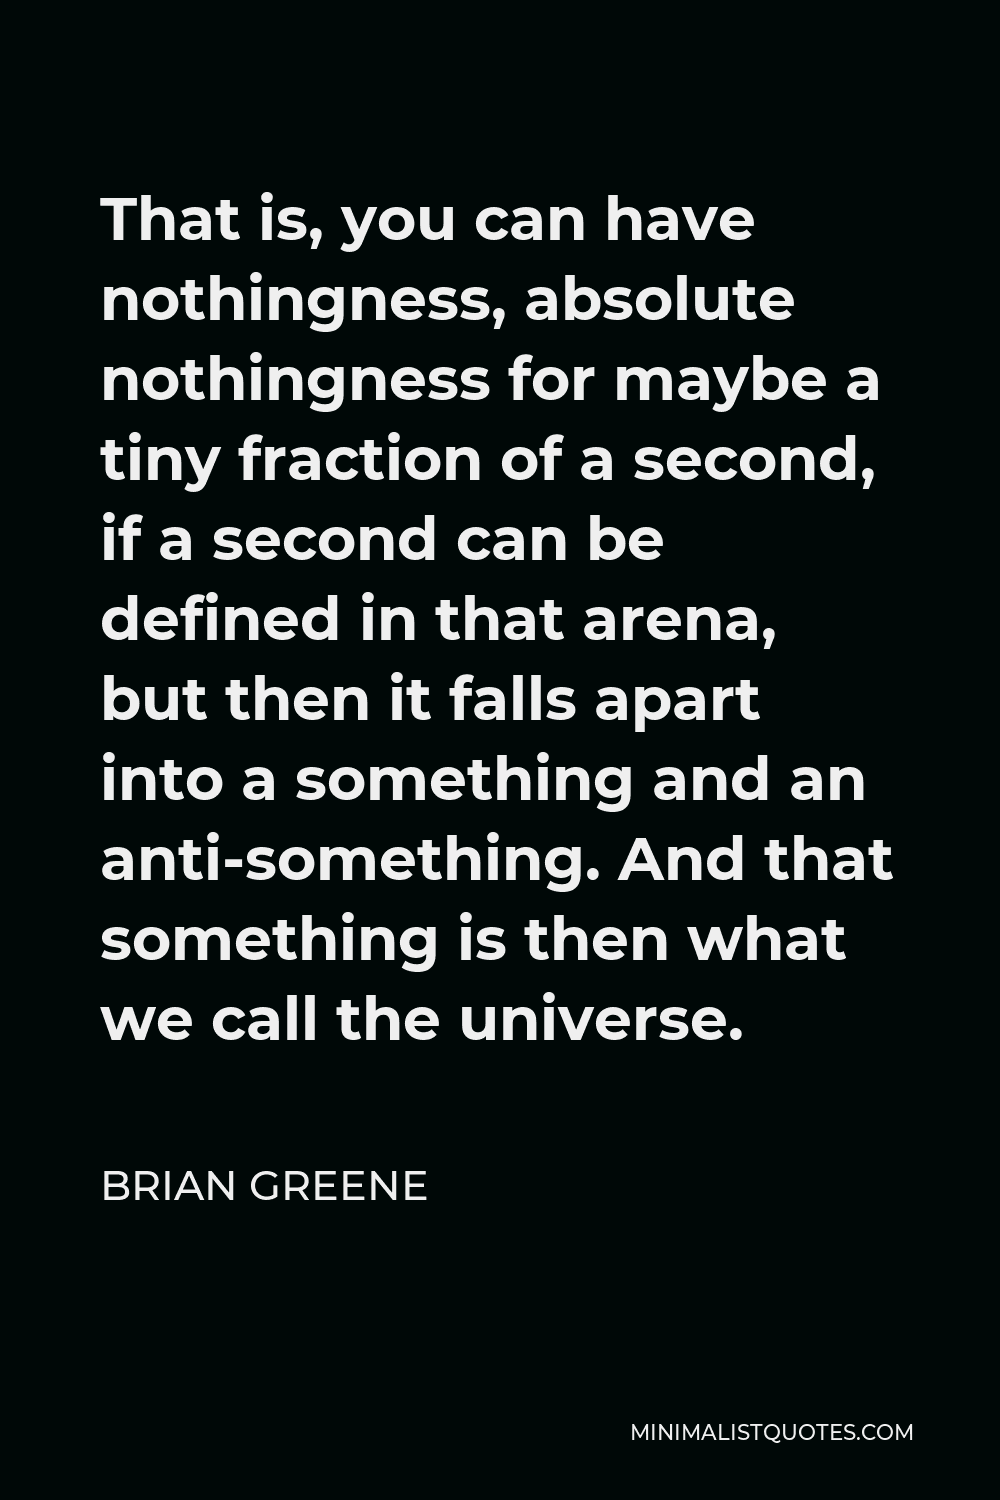 Brian Greene Quote - That is, you can have nothingness, absolute nothingness for maybe a tiny fraction of a second, if a second can be defined in that arena, but then it falls apart into a something and an anti-something. And that something is then what we call the universe.